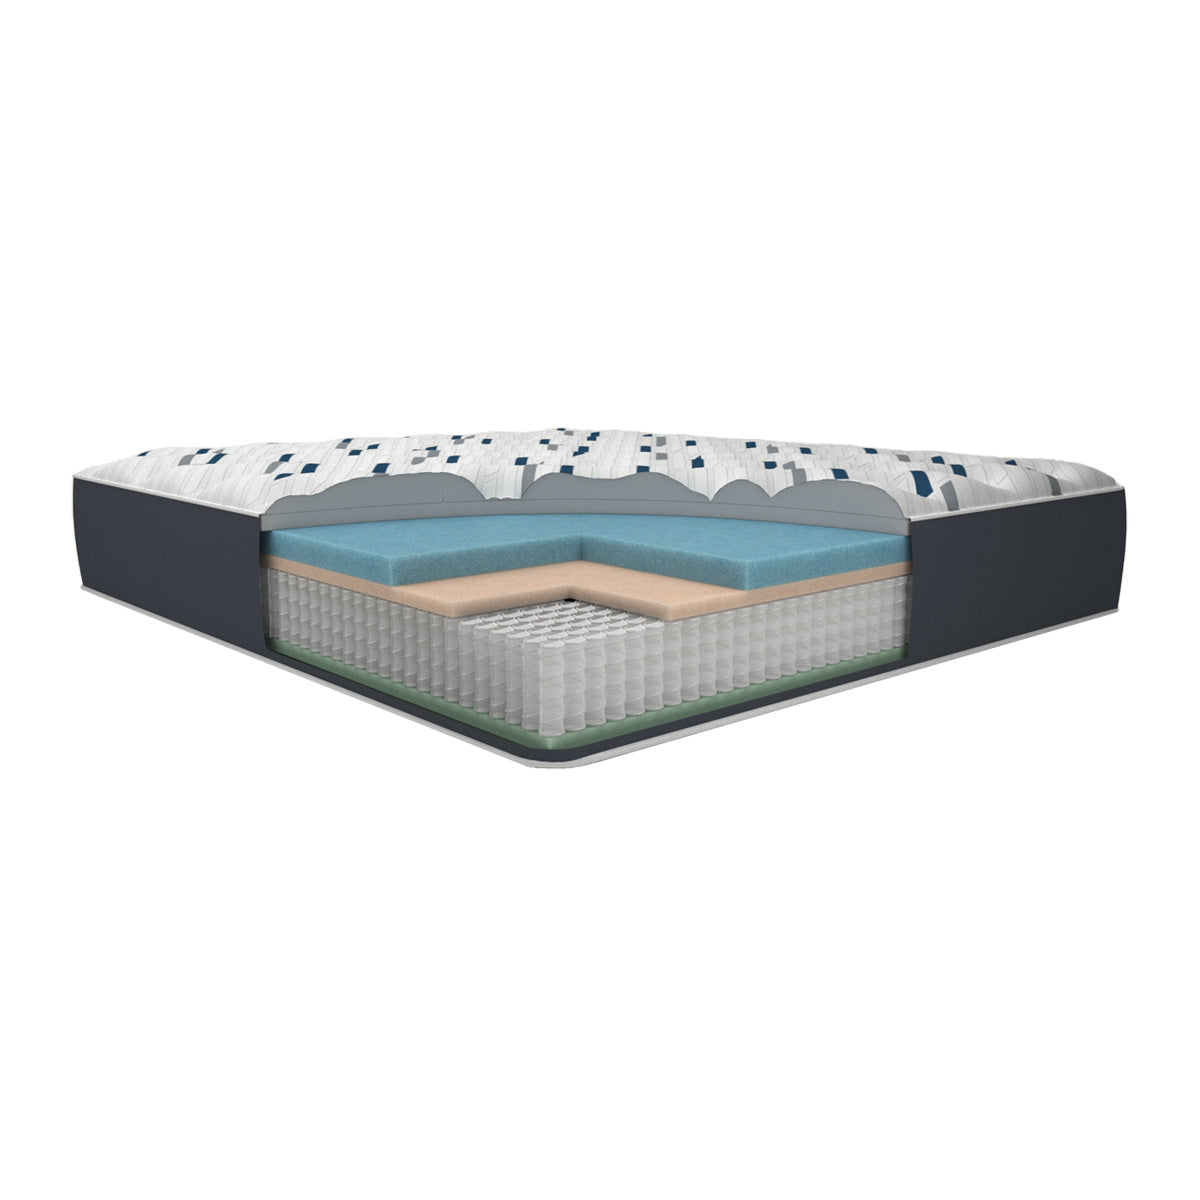 Bodiform Gel Tight Top Mattress by Englander Image of the Materials used inside the Mattress